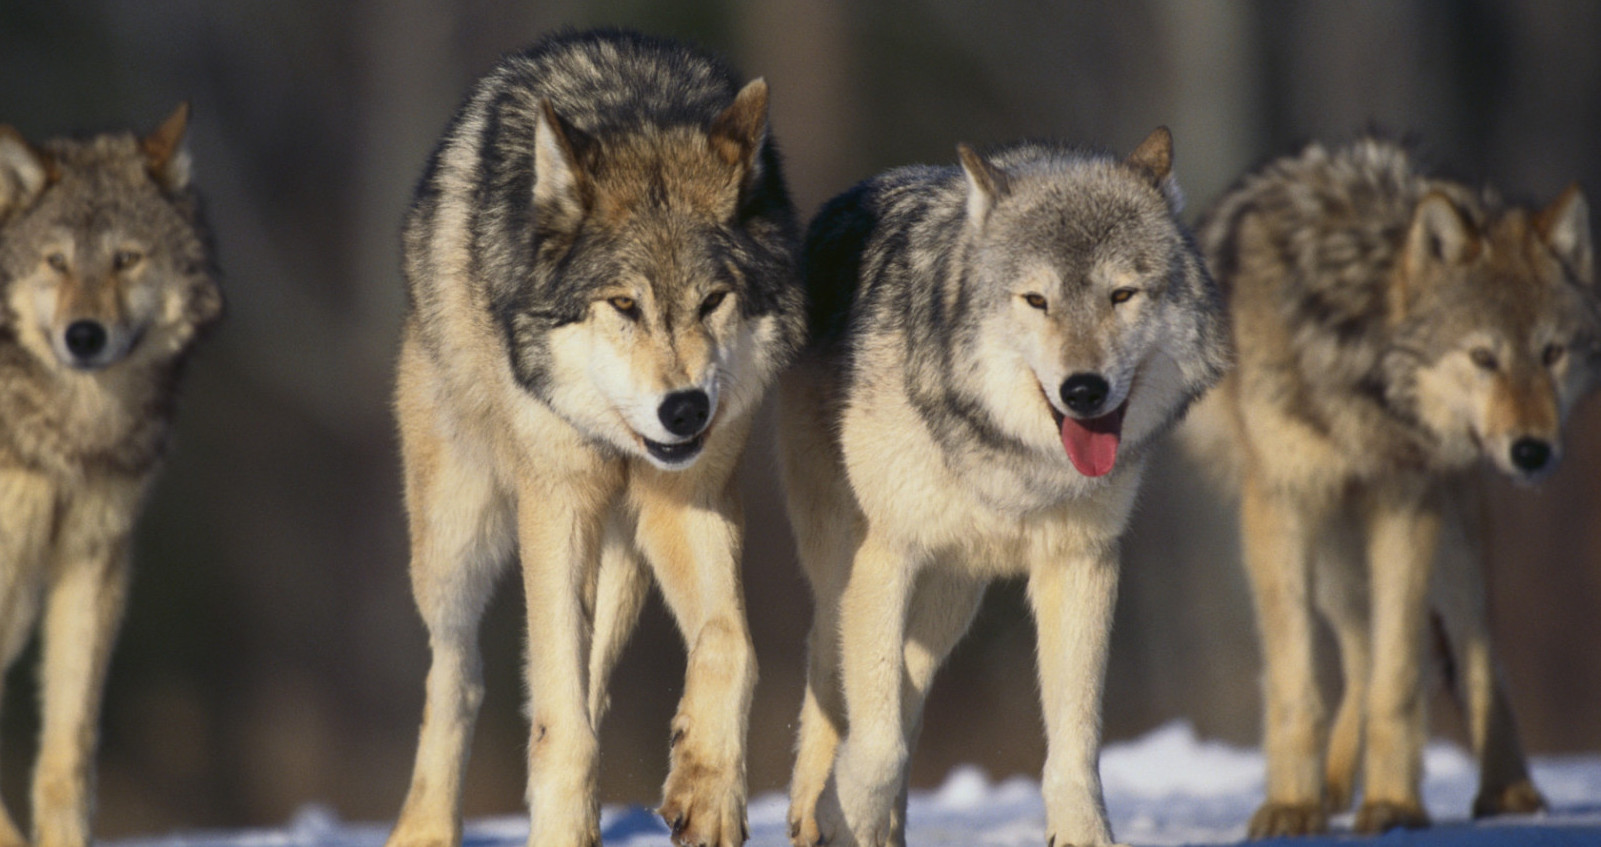 Can You Match These Animals With Their Natural Food Source? wolves